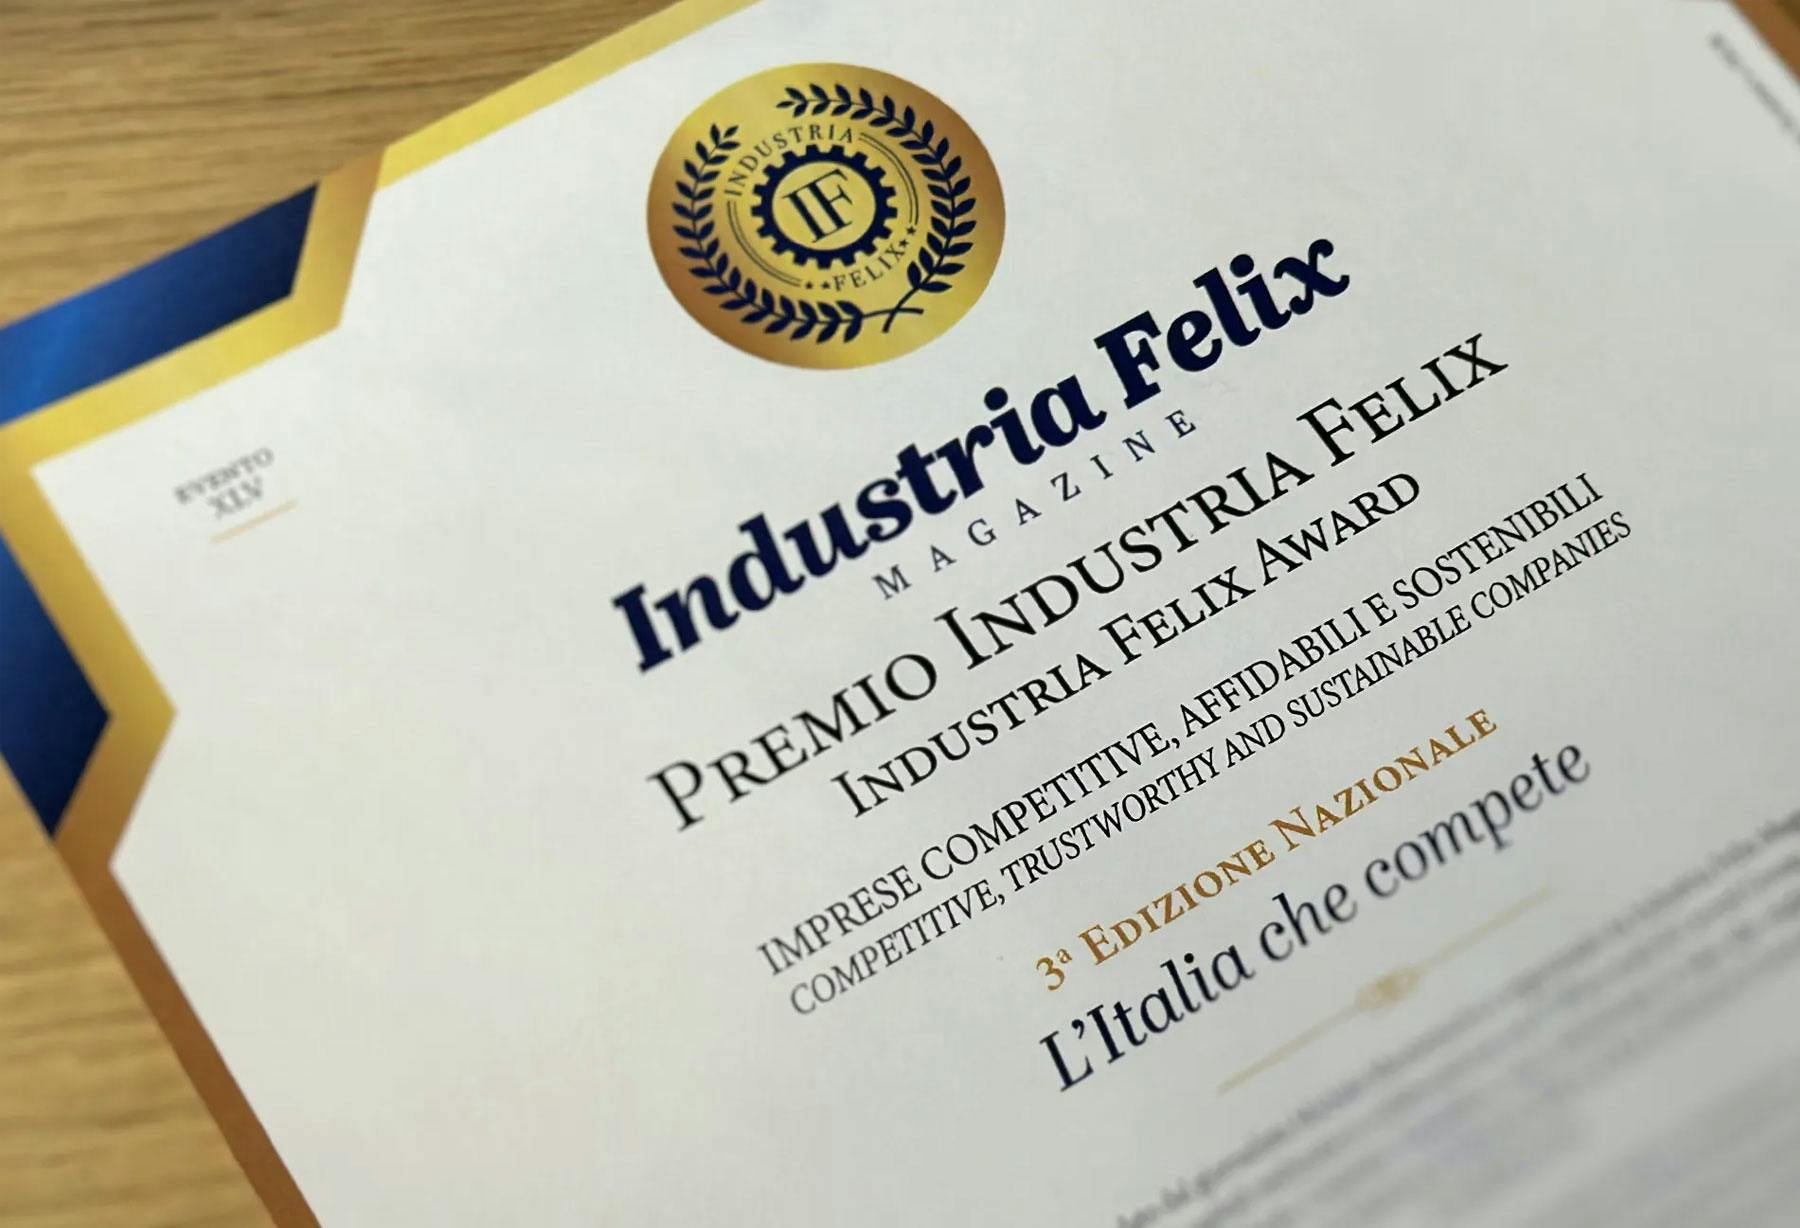 <p>For the second year running, Catellani &amp; Smith receives the prestigious Alta Onorificenza di Bilancio award during the second national edition of the Industria Felix &#8211; L&#8217;Italia che compete Awards, assigned to the 203 most competitive and reliable Italian firms on the national business scene. Organised by the quarterly economics and finance publication (a supplement of Il Sole 24 Ore), the award is assigned based on an algorithm of competitiveness of Cerved, one of Europe’s leading ratings agencies.</p>
